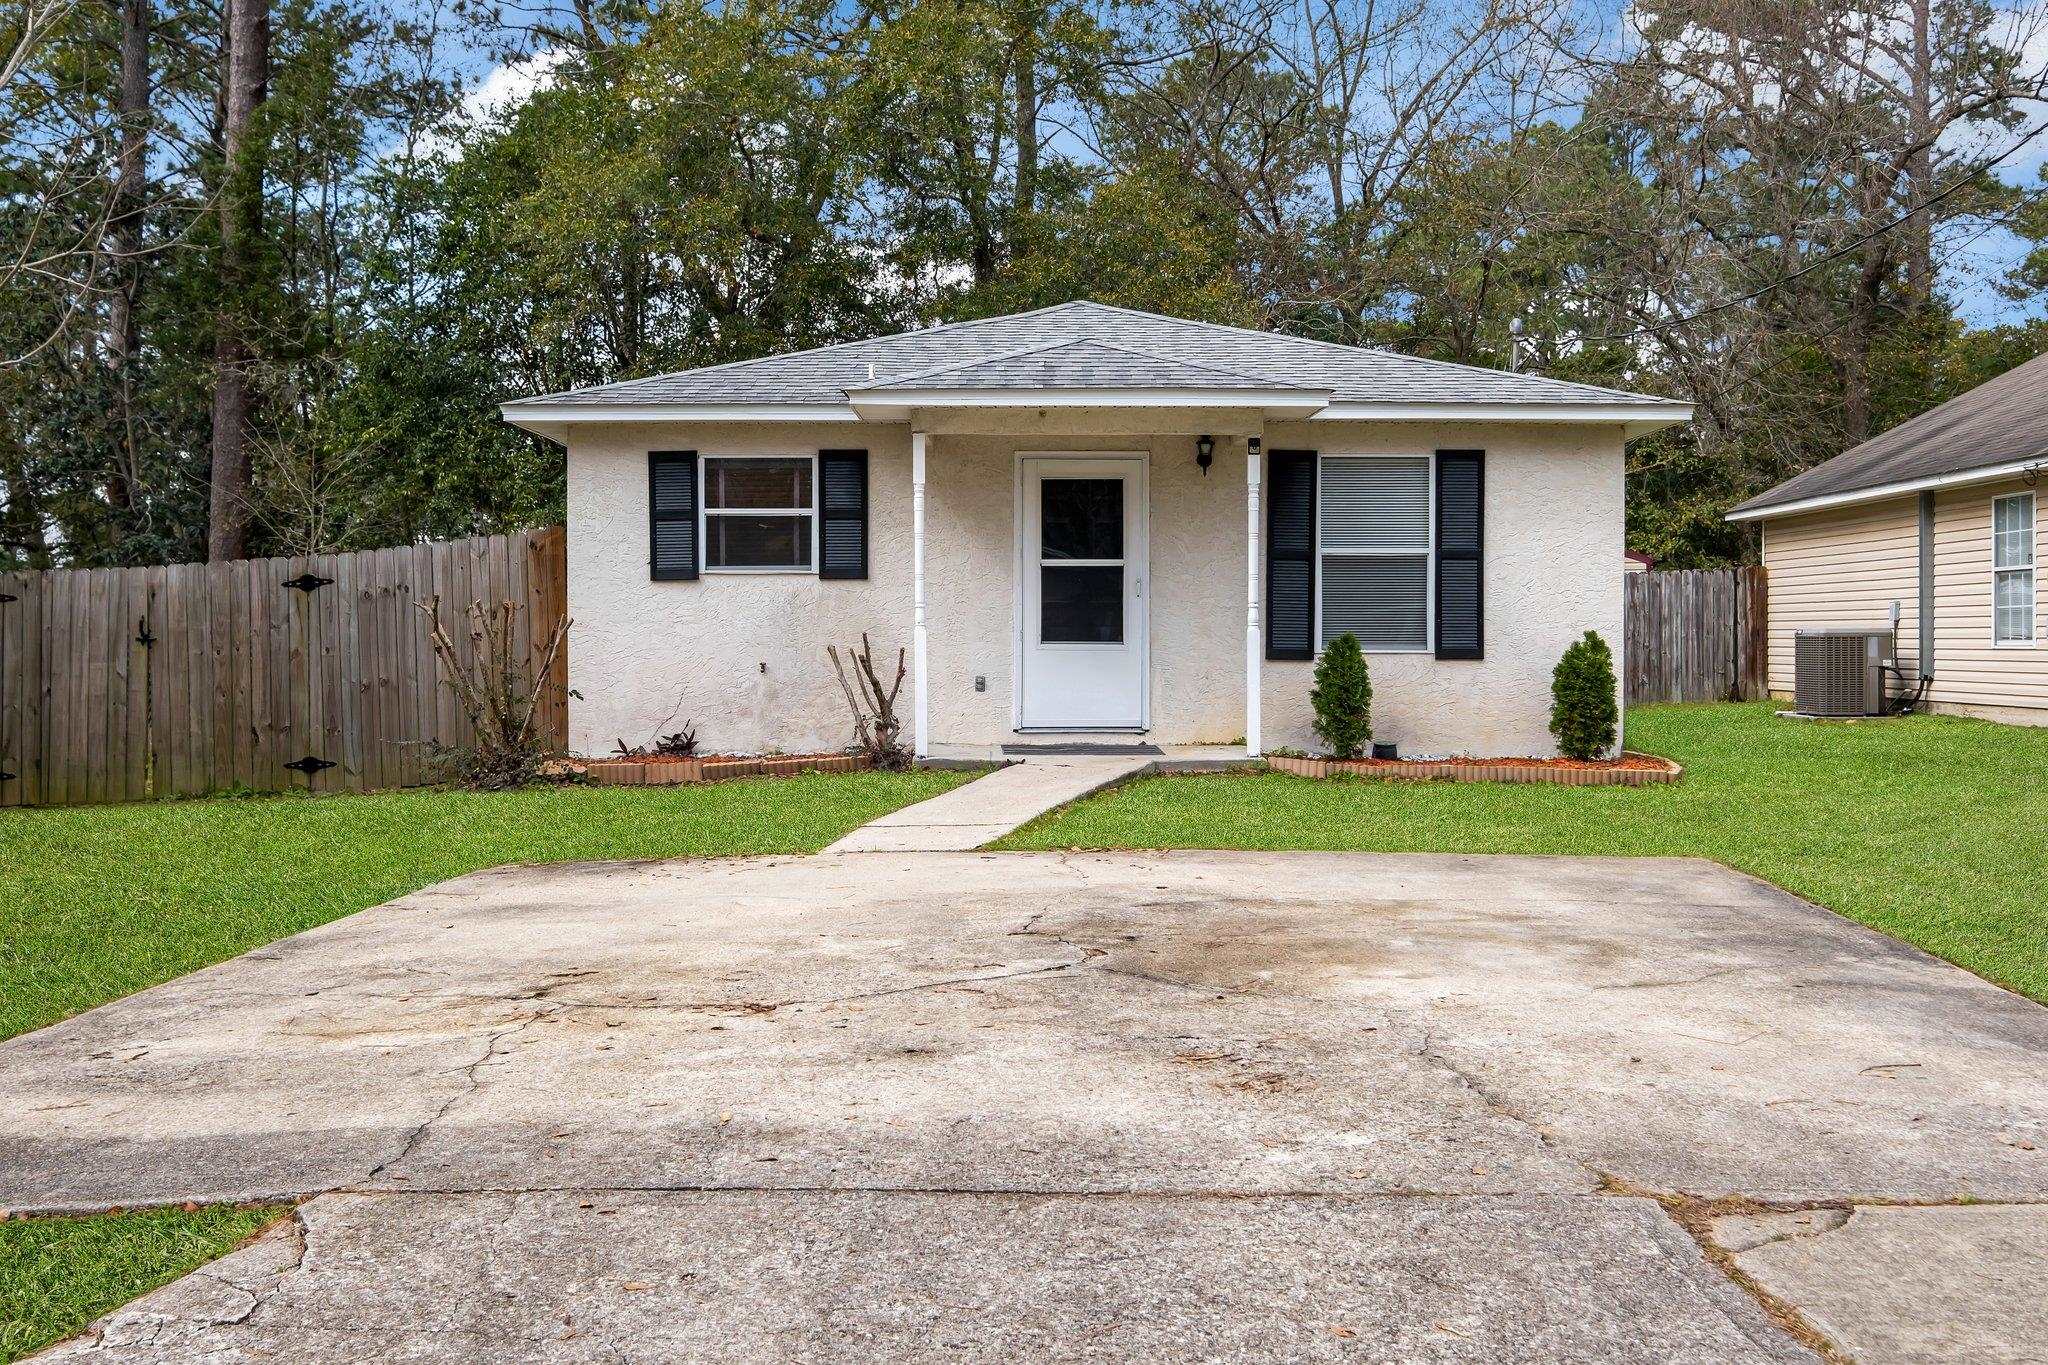 1430 Connecticut St,TALLAHASSEE,Florida 32304,3 Bedrooms Bedrooms,2 BathroomsBathrooms,Detached single family,1430 Connecticut St,368684